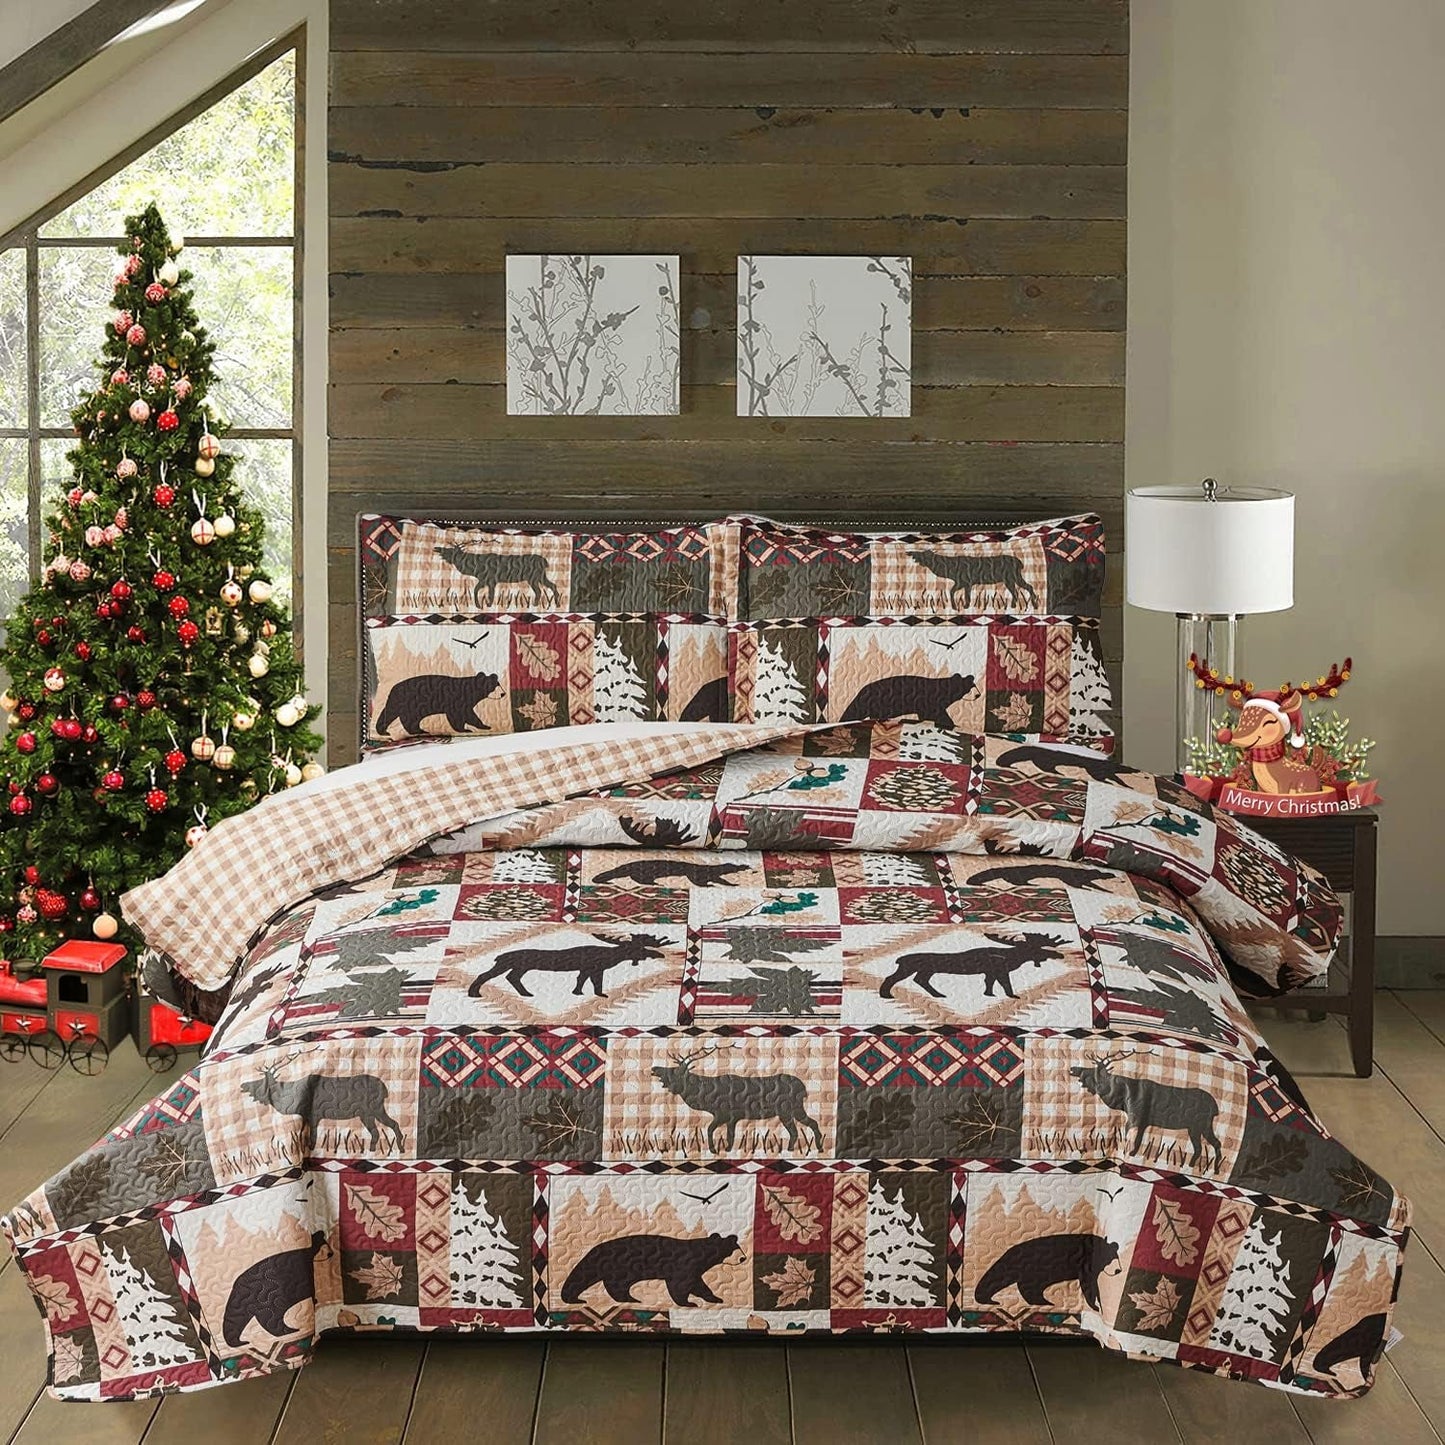 3 Piece Rustic Quilts Set Full/Queen Size Bedspreads, Lightweight Lodge Quilt Bedding Sets Comforter with 2 Pillow Shams Patchwork Bear Themed Coverlet for All Season